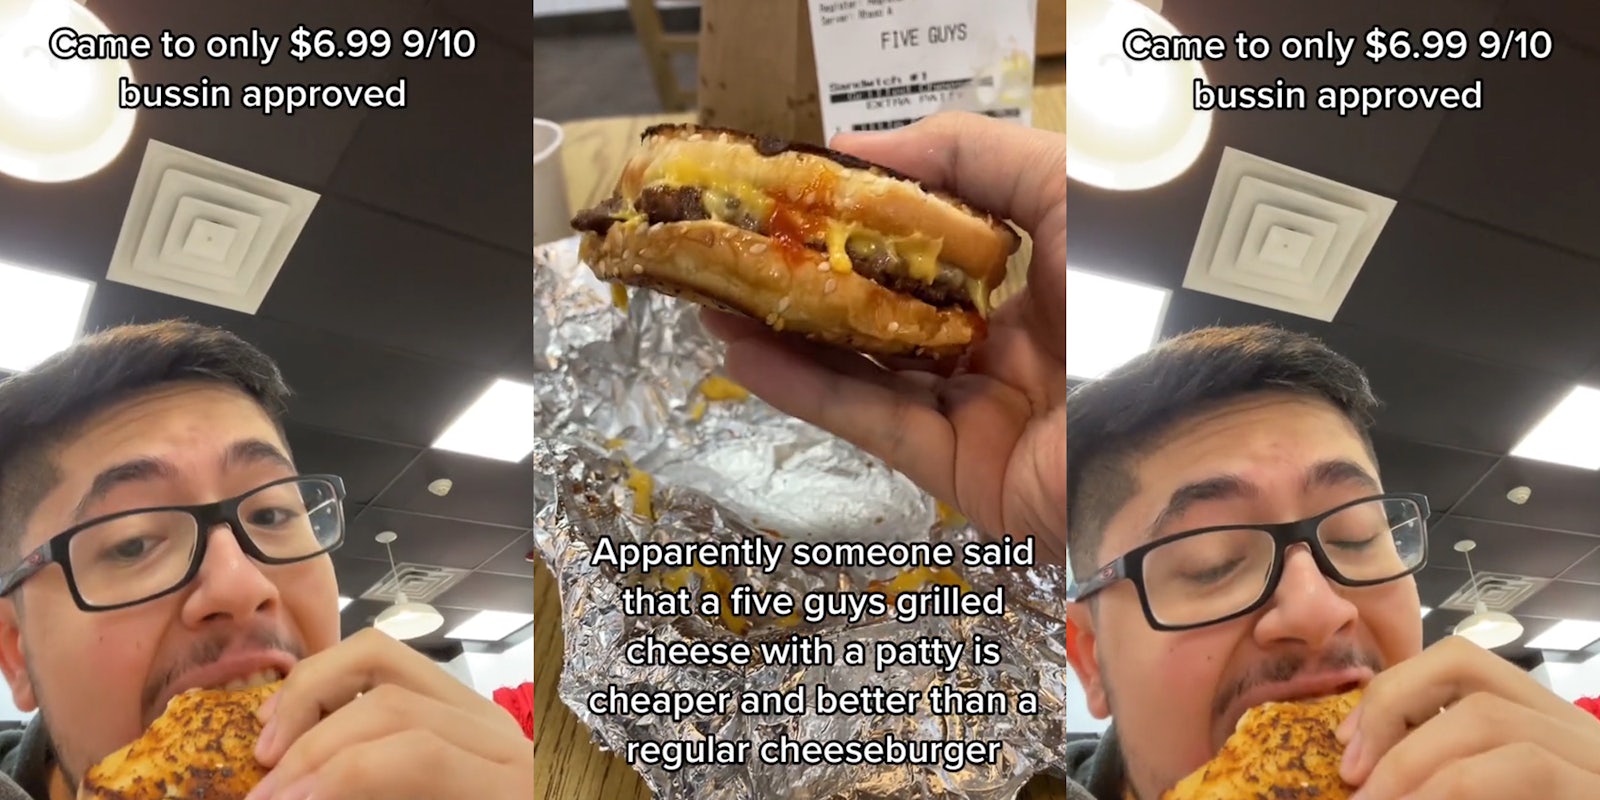 man biting into Five Guys grilled cheese cheeseburger caption 'Came to only $6.99 9/10 bussin approved' (l) Man holding Five Guys grilled cheese cheeseburger caption 'Apparently someone said that five guys grilled cheese with a patty is cheaper and better than a regular cheeseburger' (c) man biting into Five Guys grilled cheese cheeseburger caption 'Came to only $6.99 9/10 bussin approved' (r)